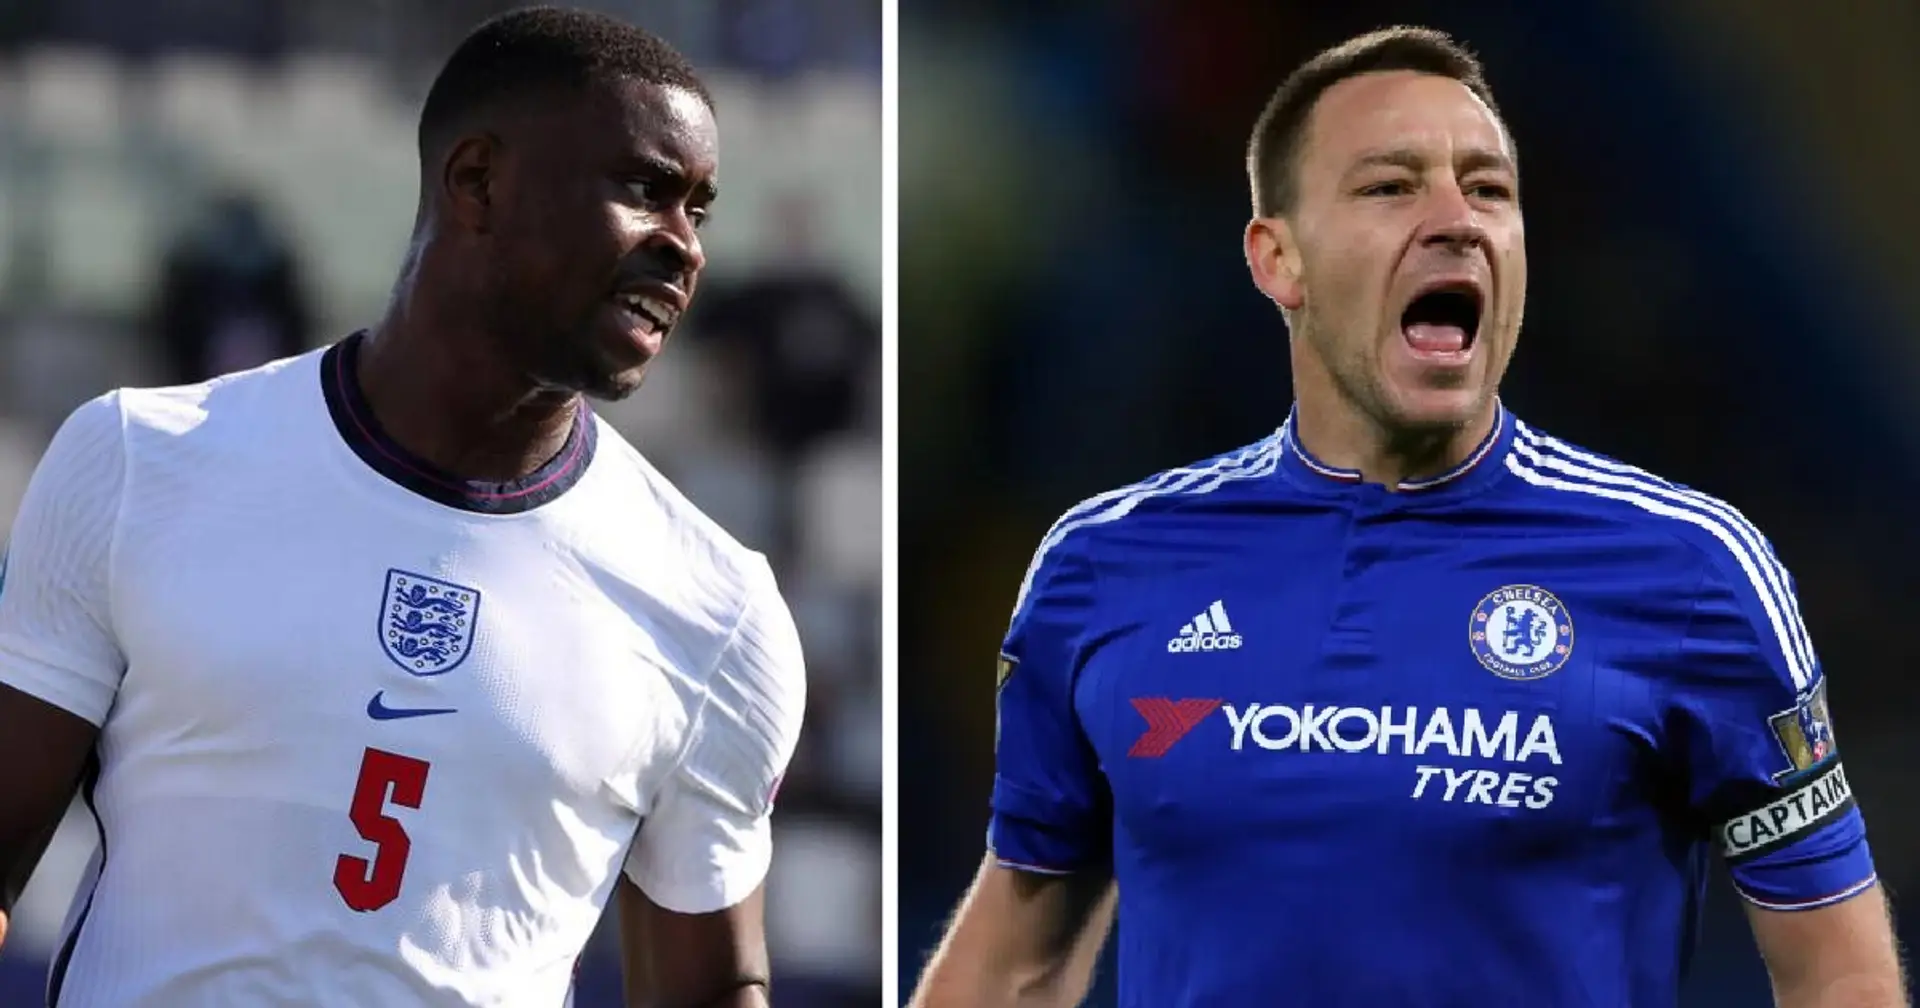 'It's a privilege': Ex-Chelsea man Guehi opens up on John Terry's influence